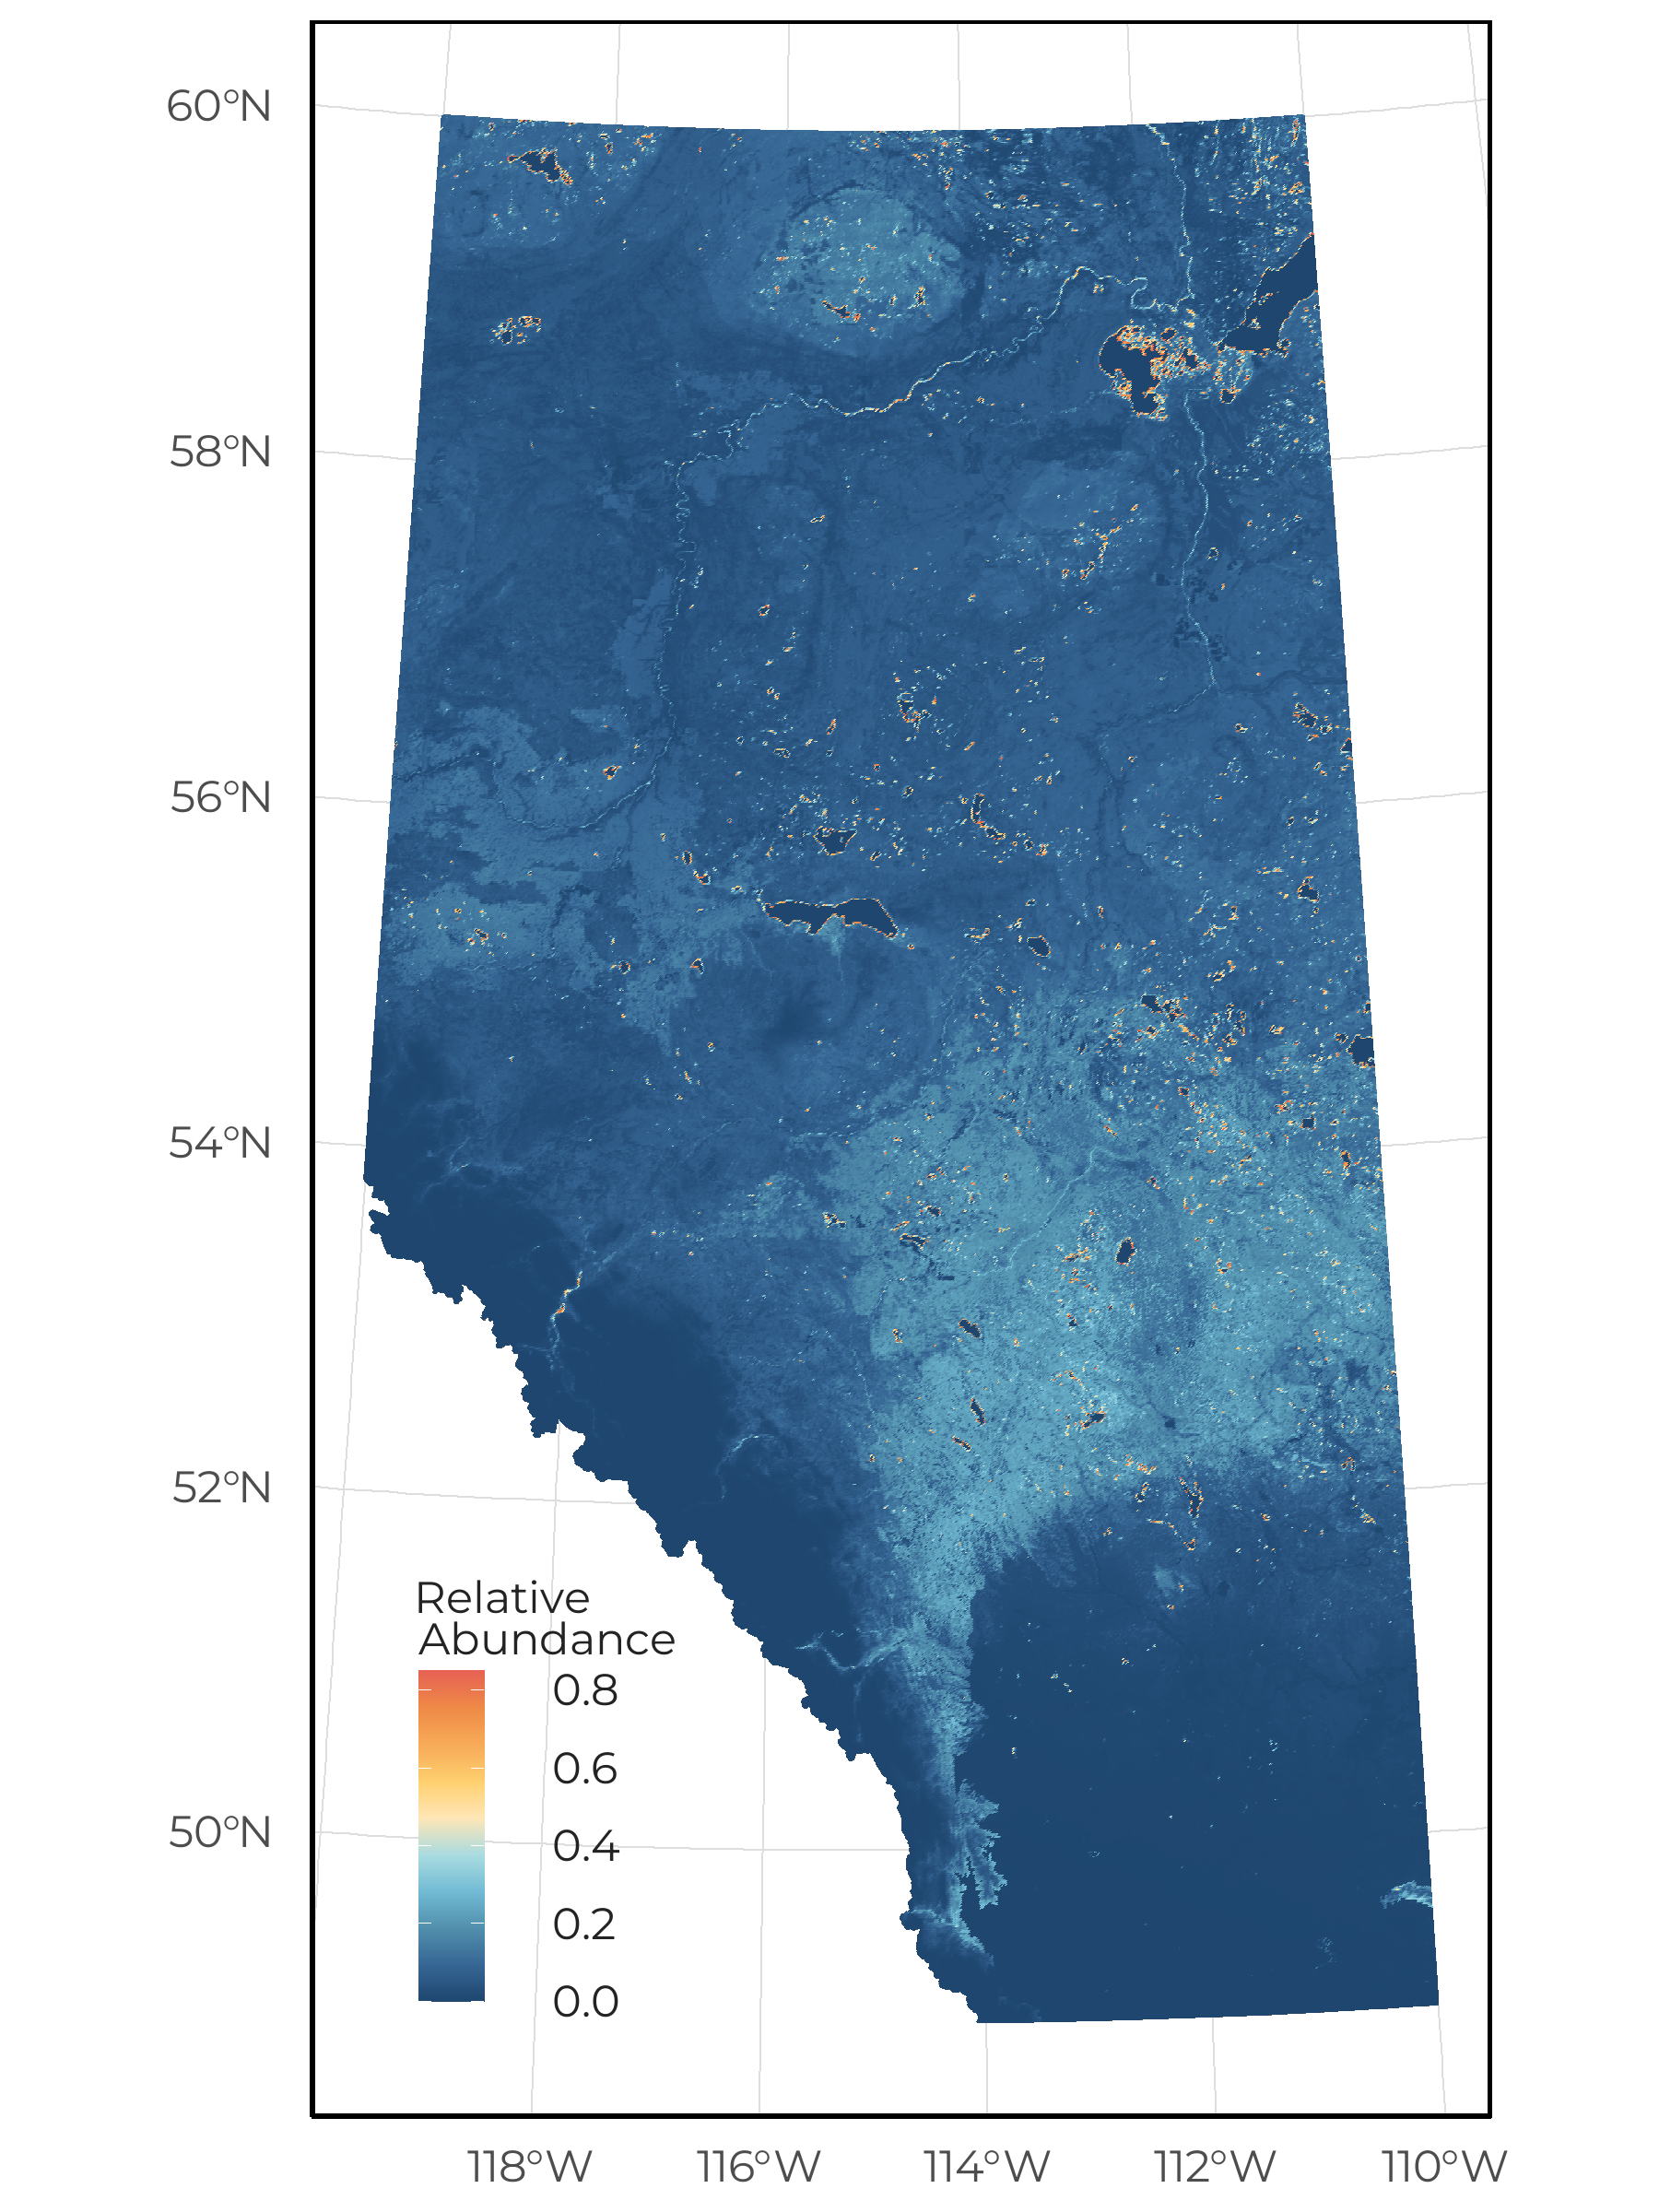 The predicted relative abundance of Wood Frog as a function of vegetation, soil, human footprint, and space/climate across Alberta under current conditions (2018).